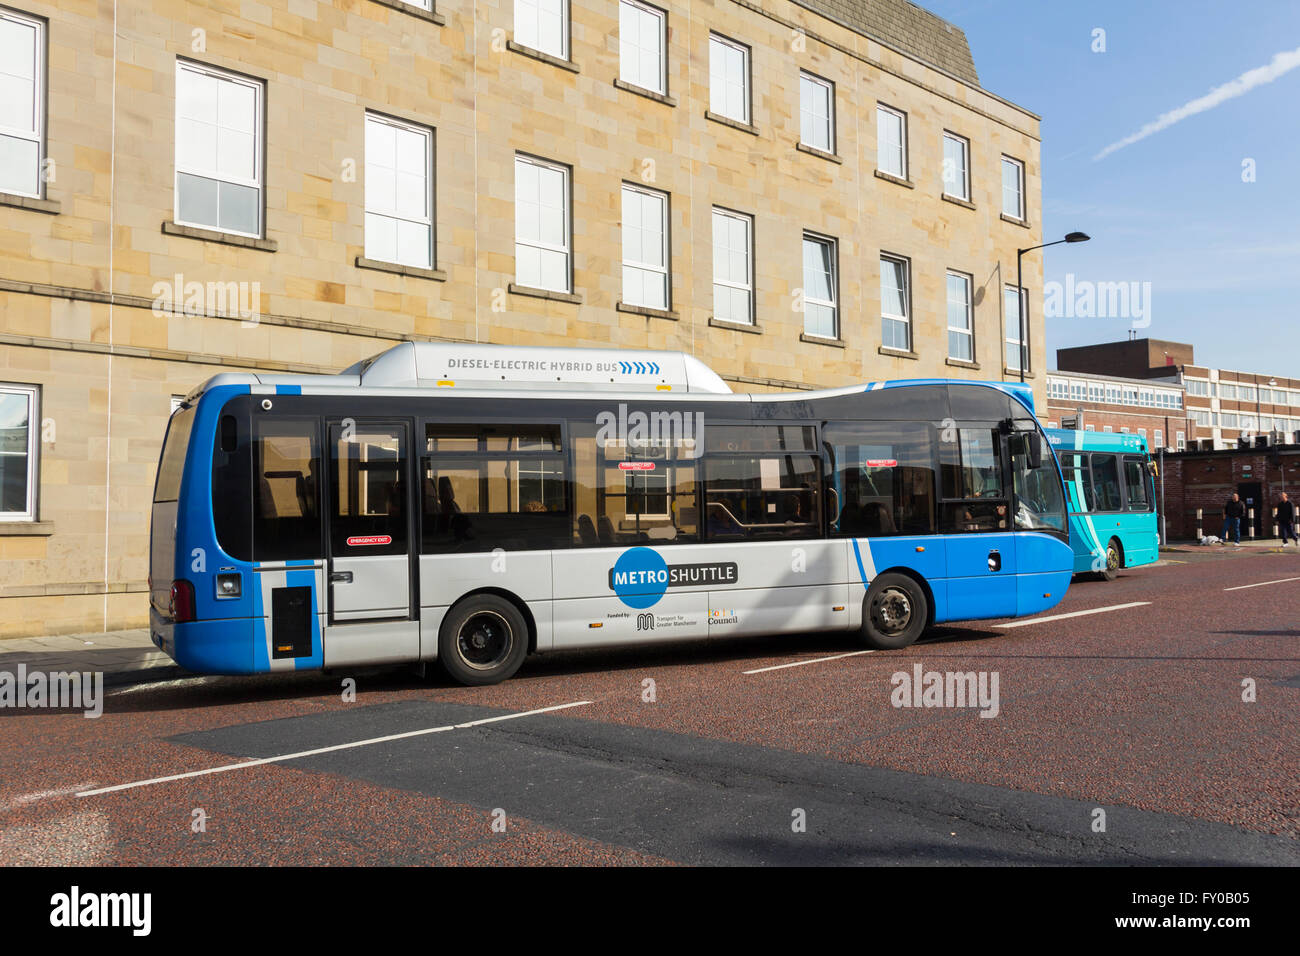 Bolton metro shuttle bus, service 500, provides a free circular route bus service linking key points around Bolton town centre. Stock Photo